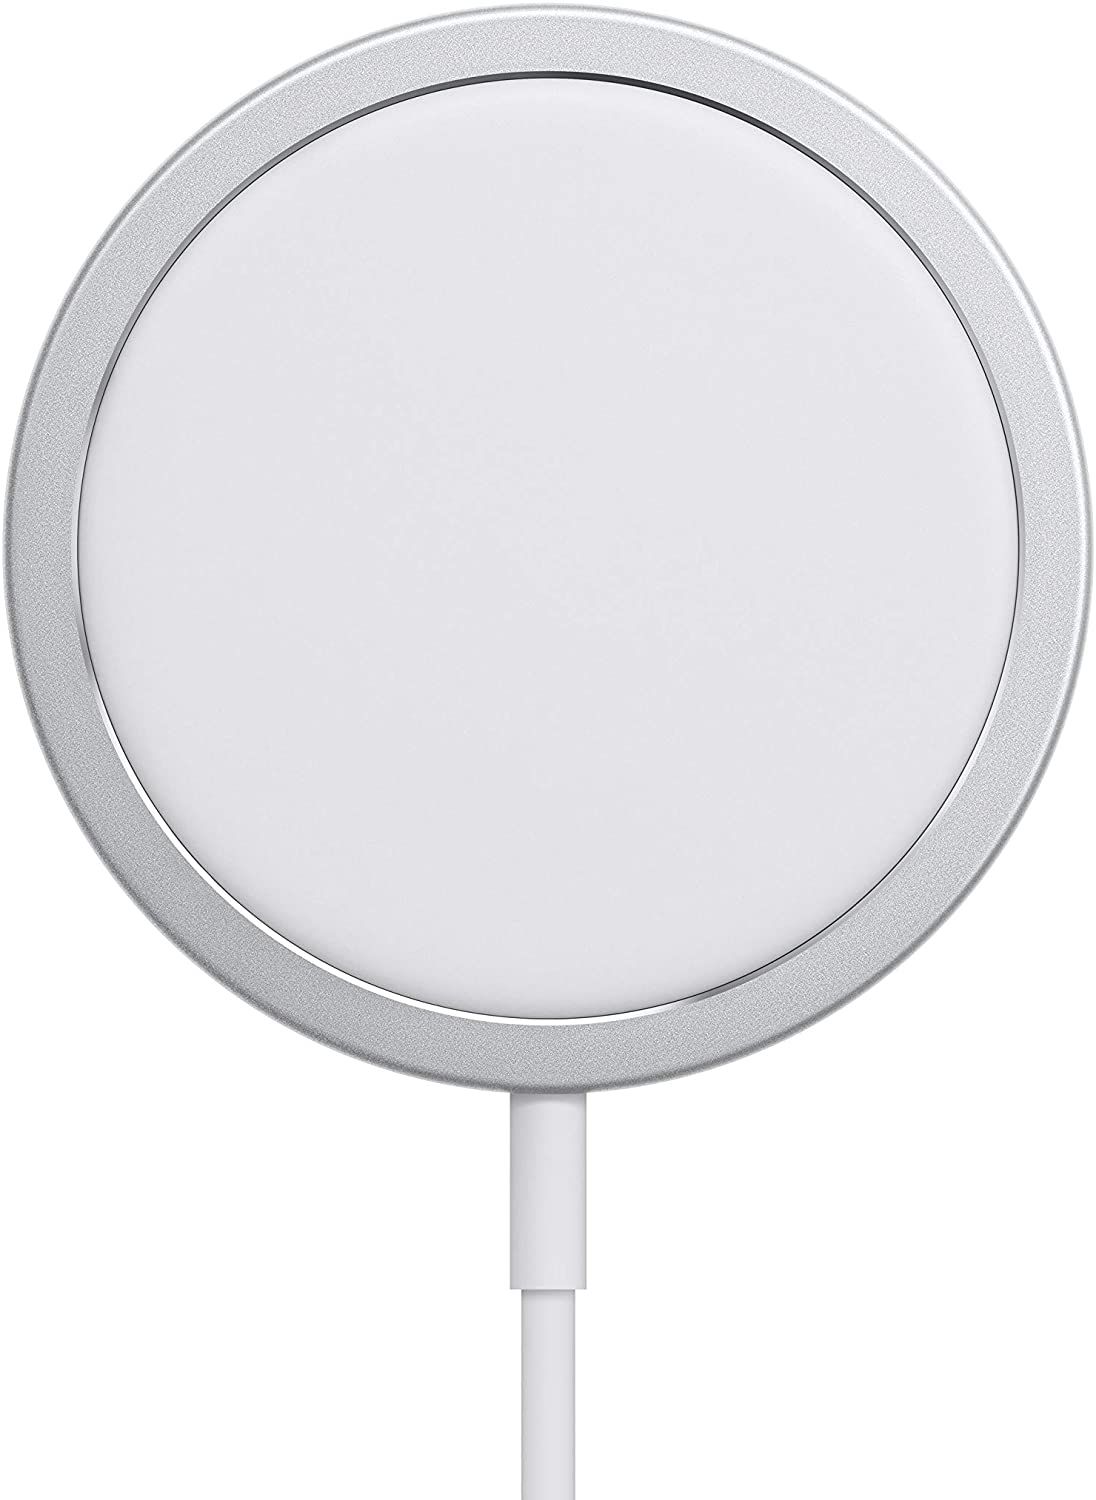 Apple MagSafe Charger front